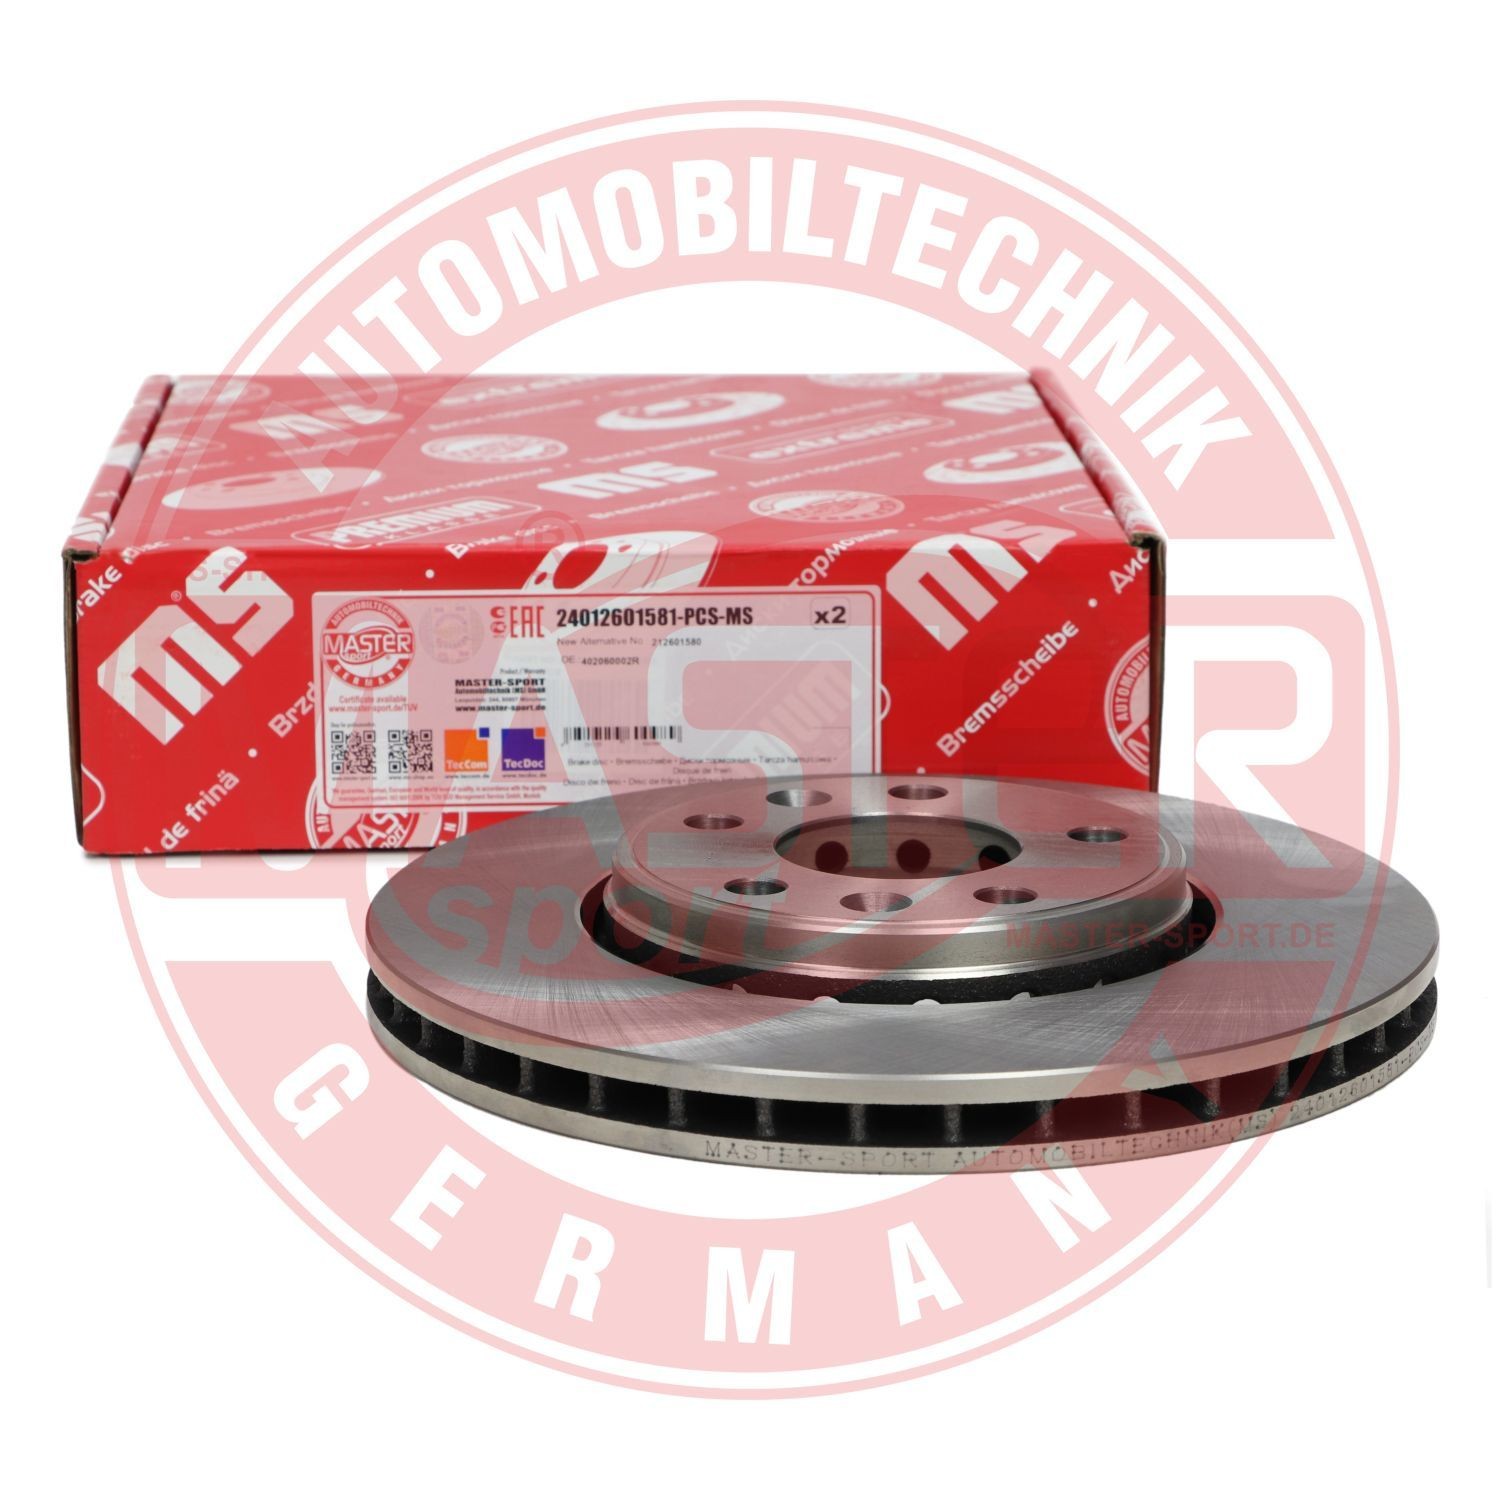 24012601581PCSMS Brake disc MASTER-SPORT AB212525460 review and test